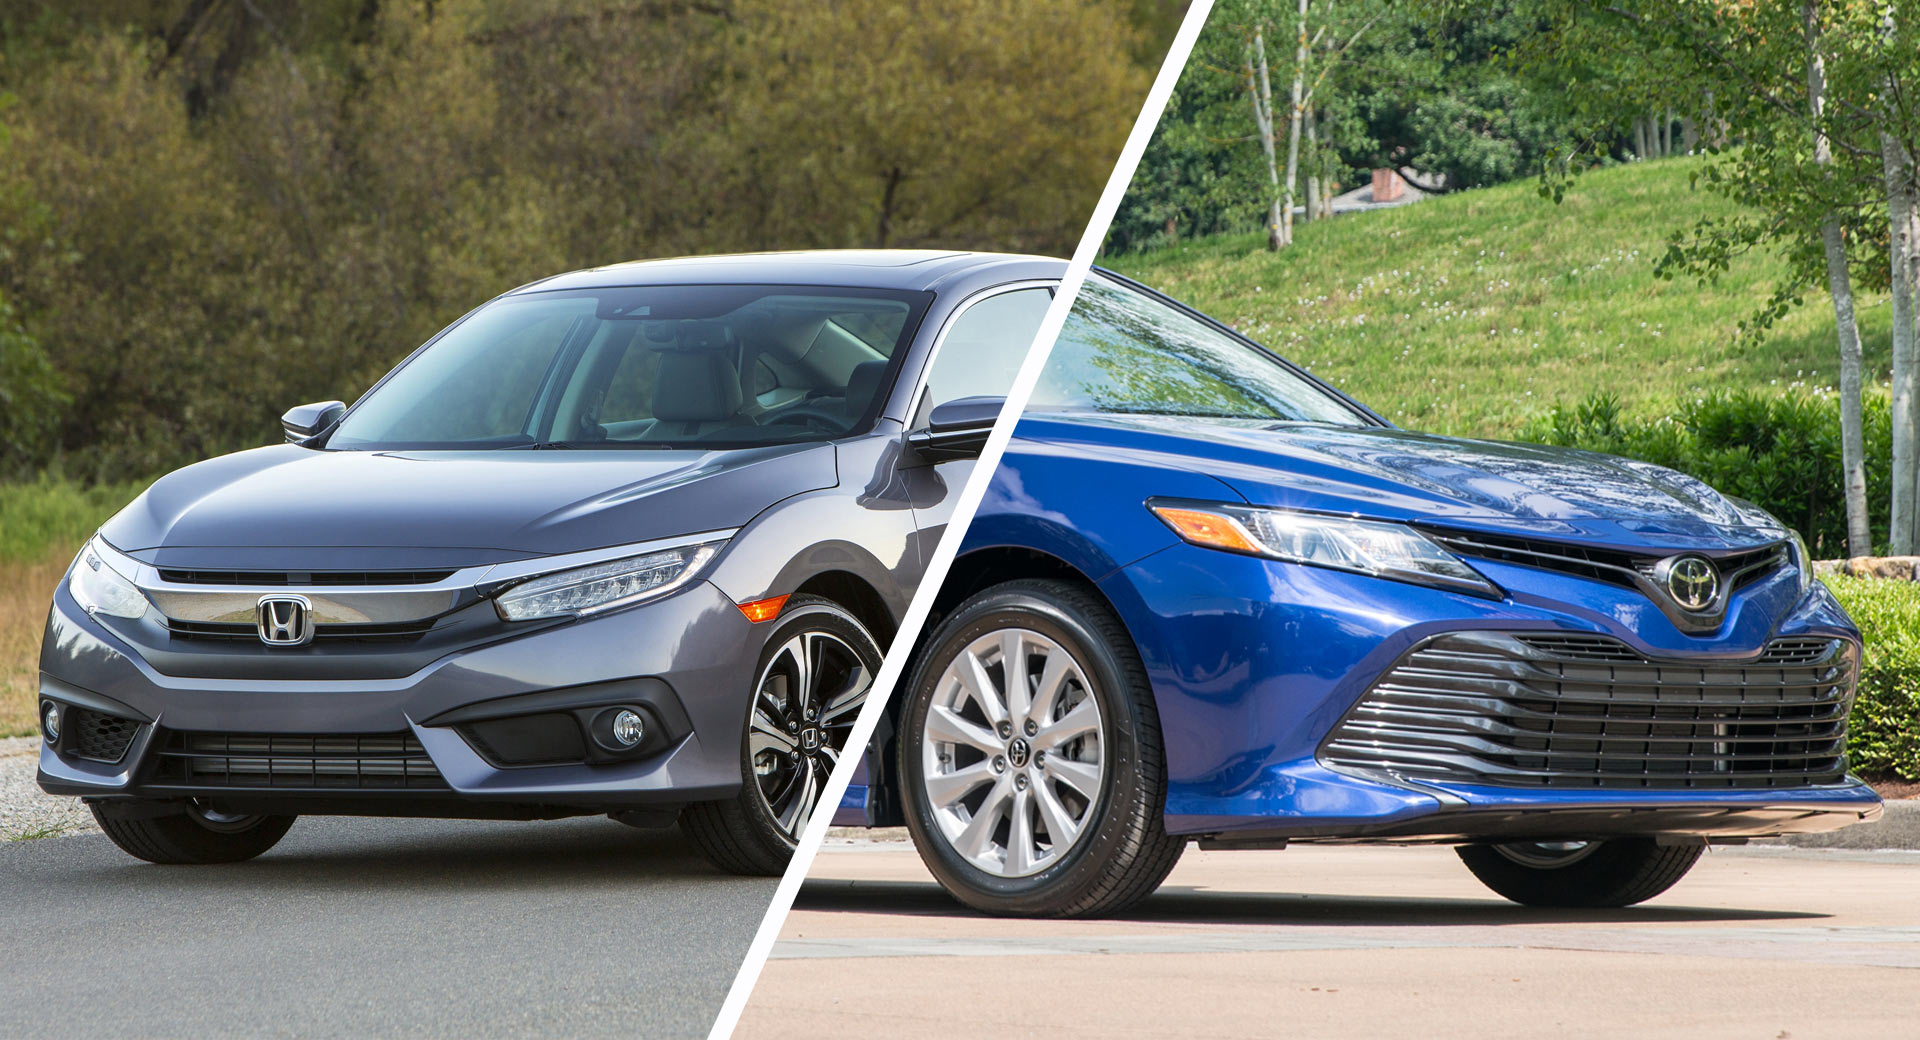 America’s 10 BestSelling Cars Of 2018 Include Two That Are Going Away